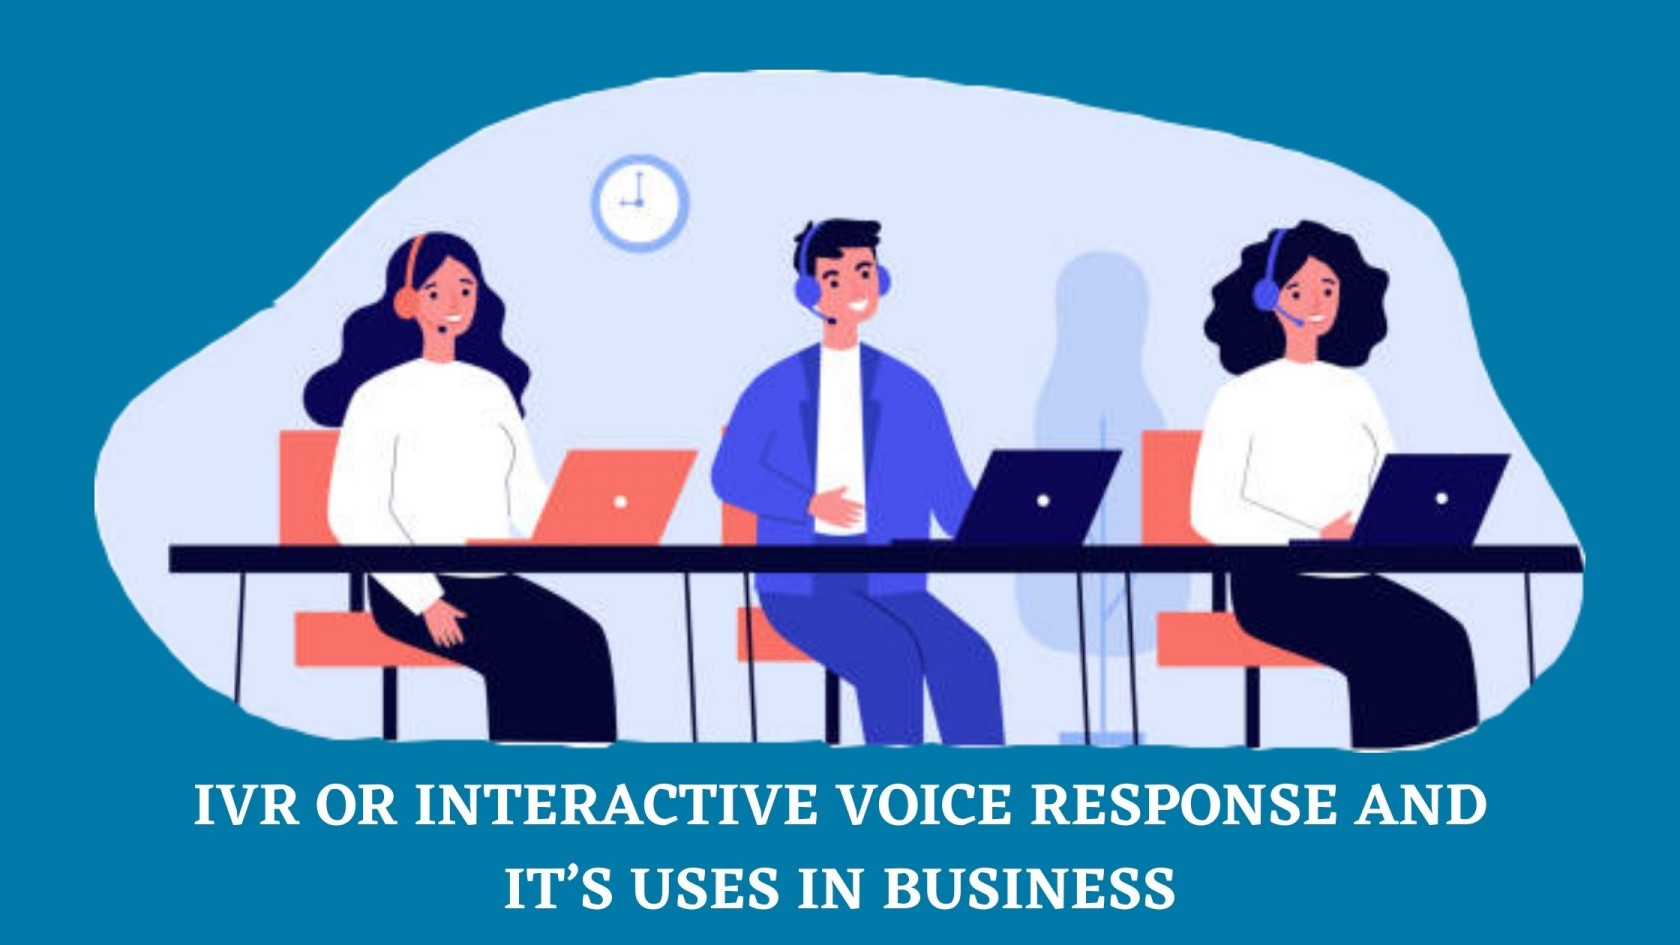 IVR or Interactive voice response